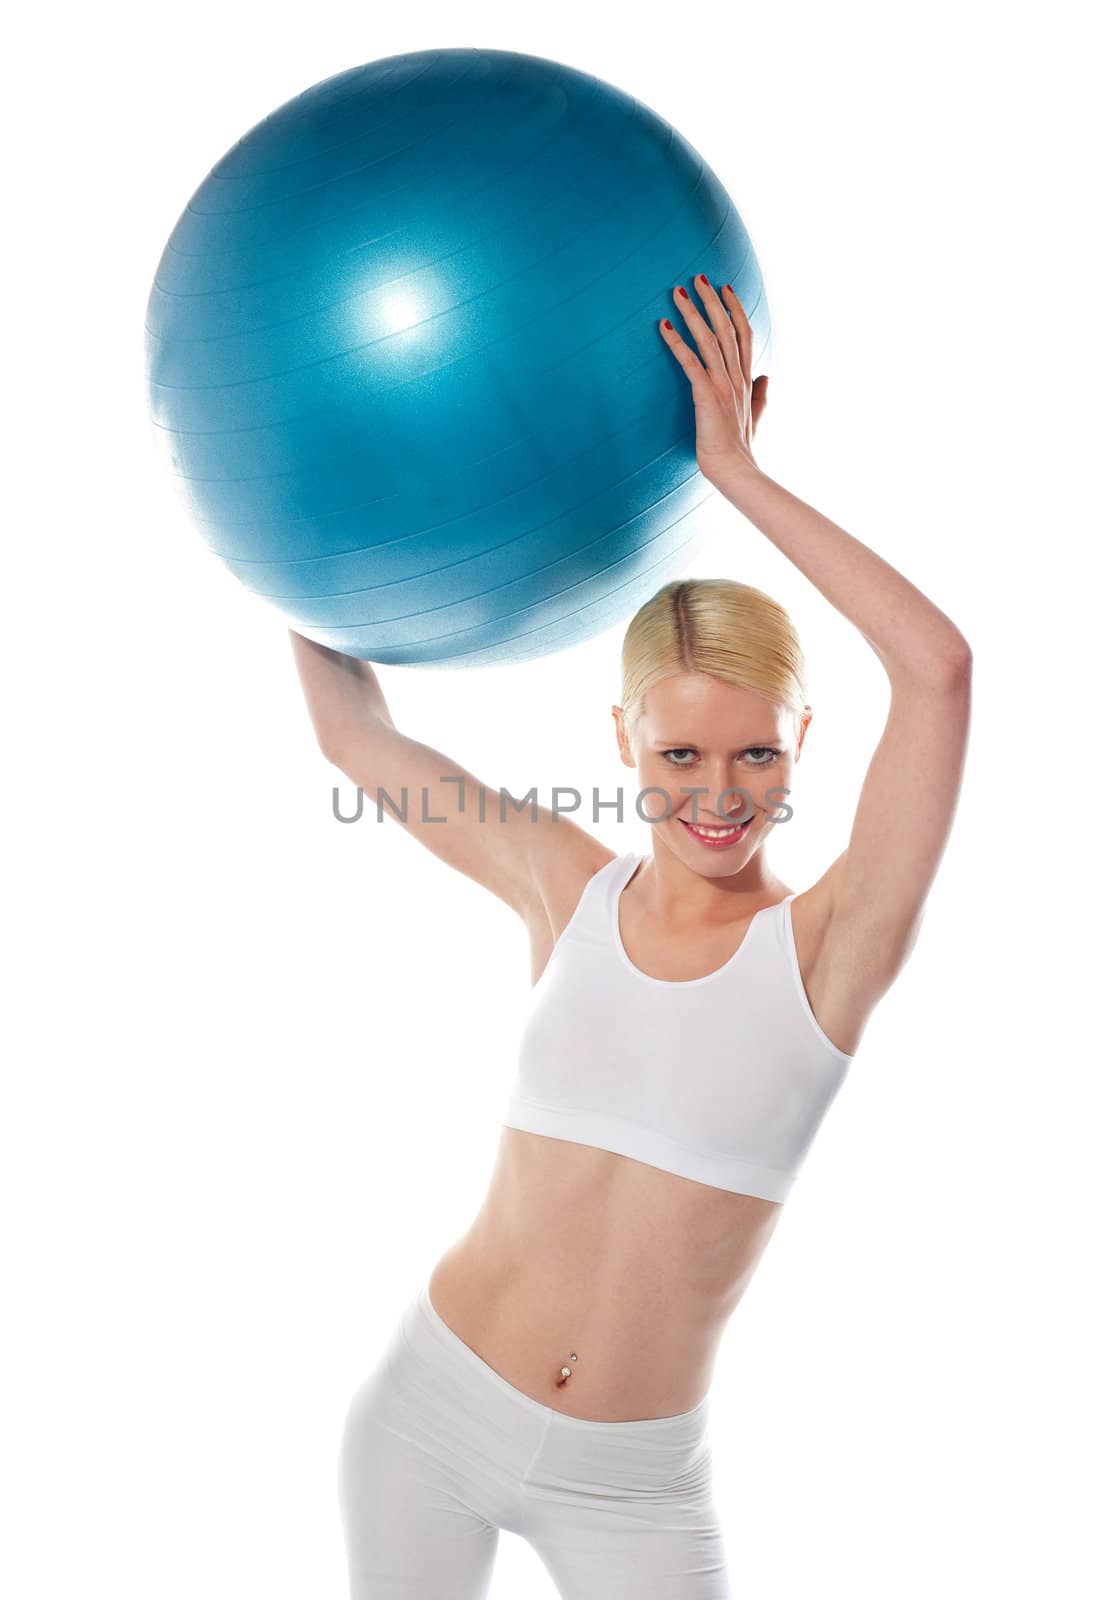 Female athlete holding blue ball, studio shot by stockyimages